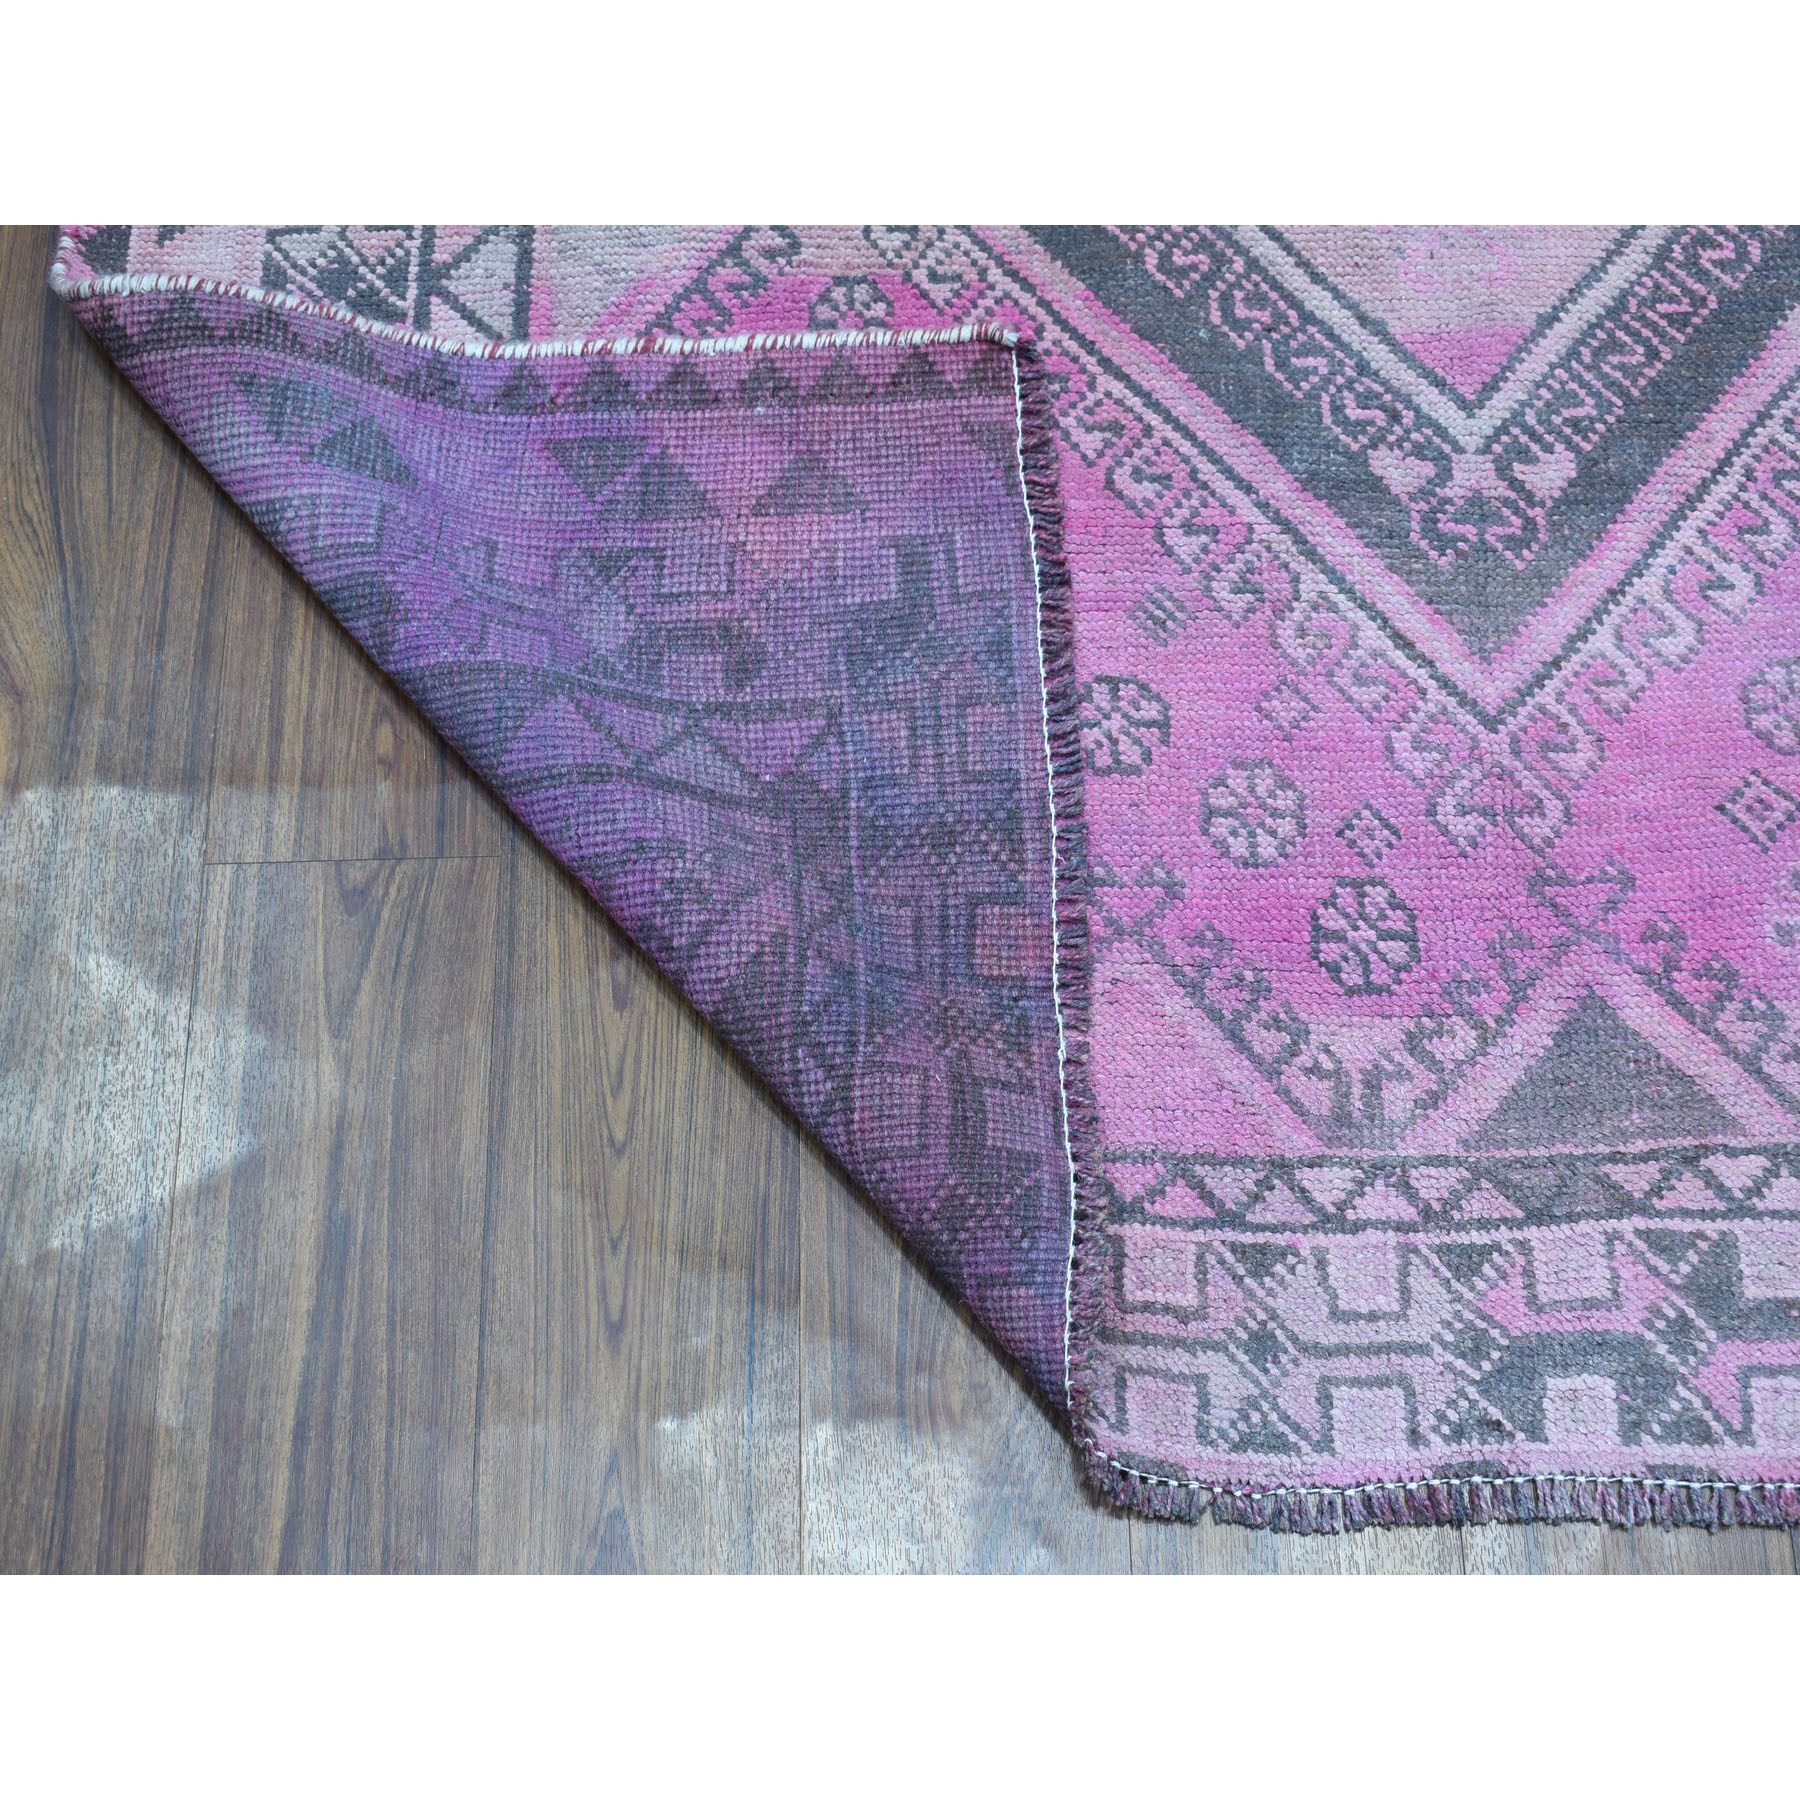 5-x8-9  Pink Vintage And Worn Down Overdyed Persian Shiraz Hand Knotted Bohemian Rug 